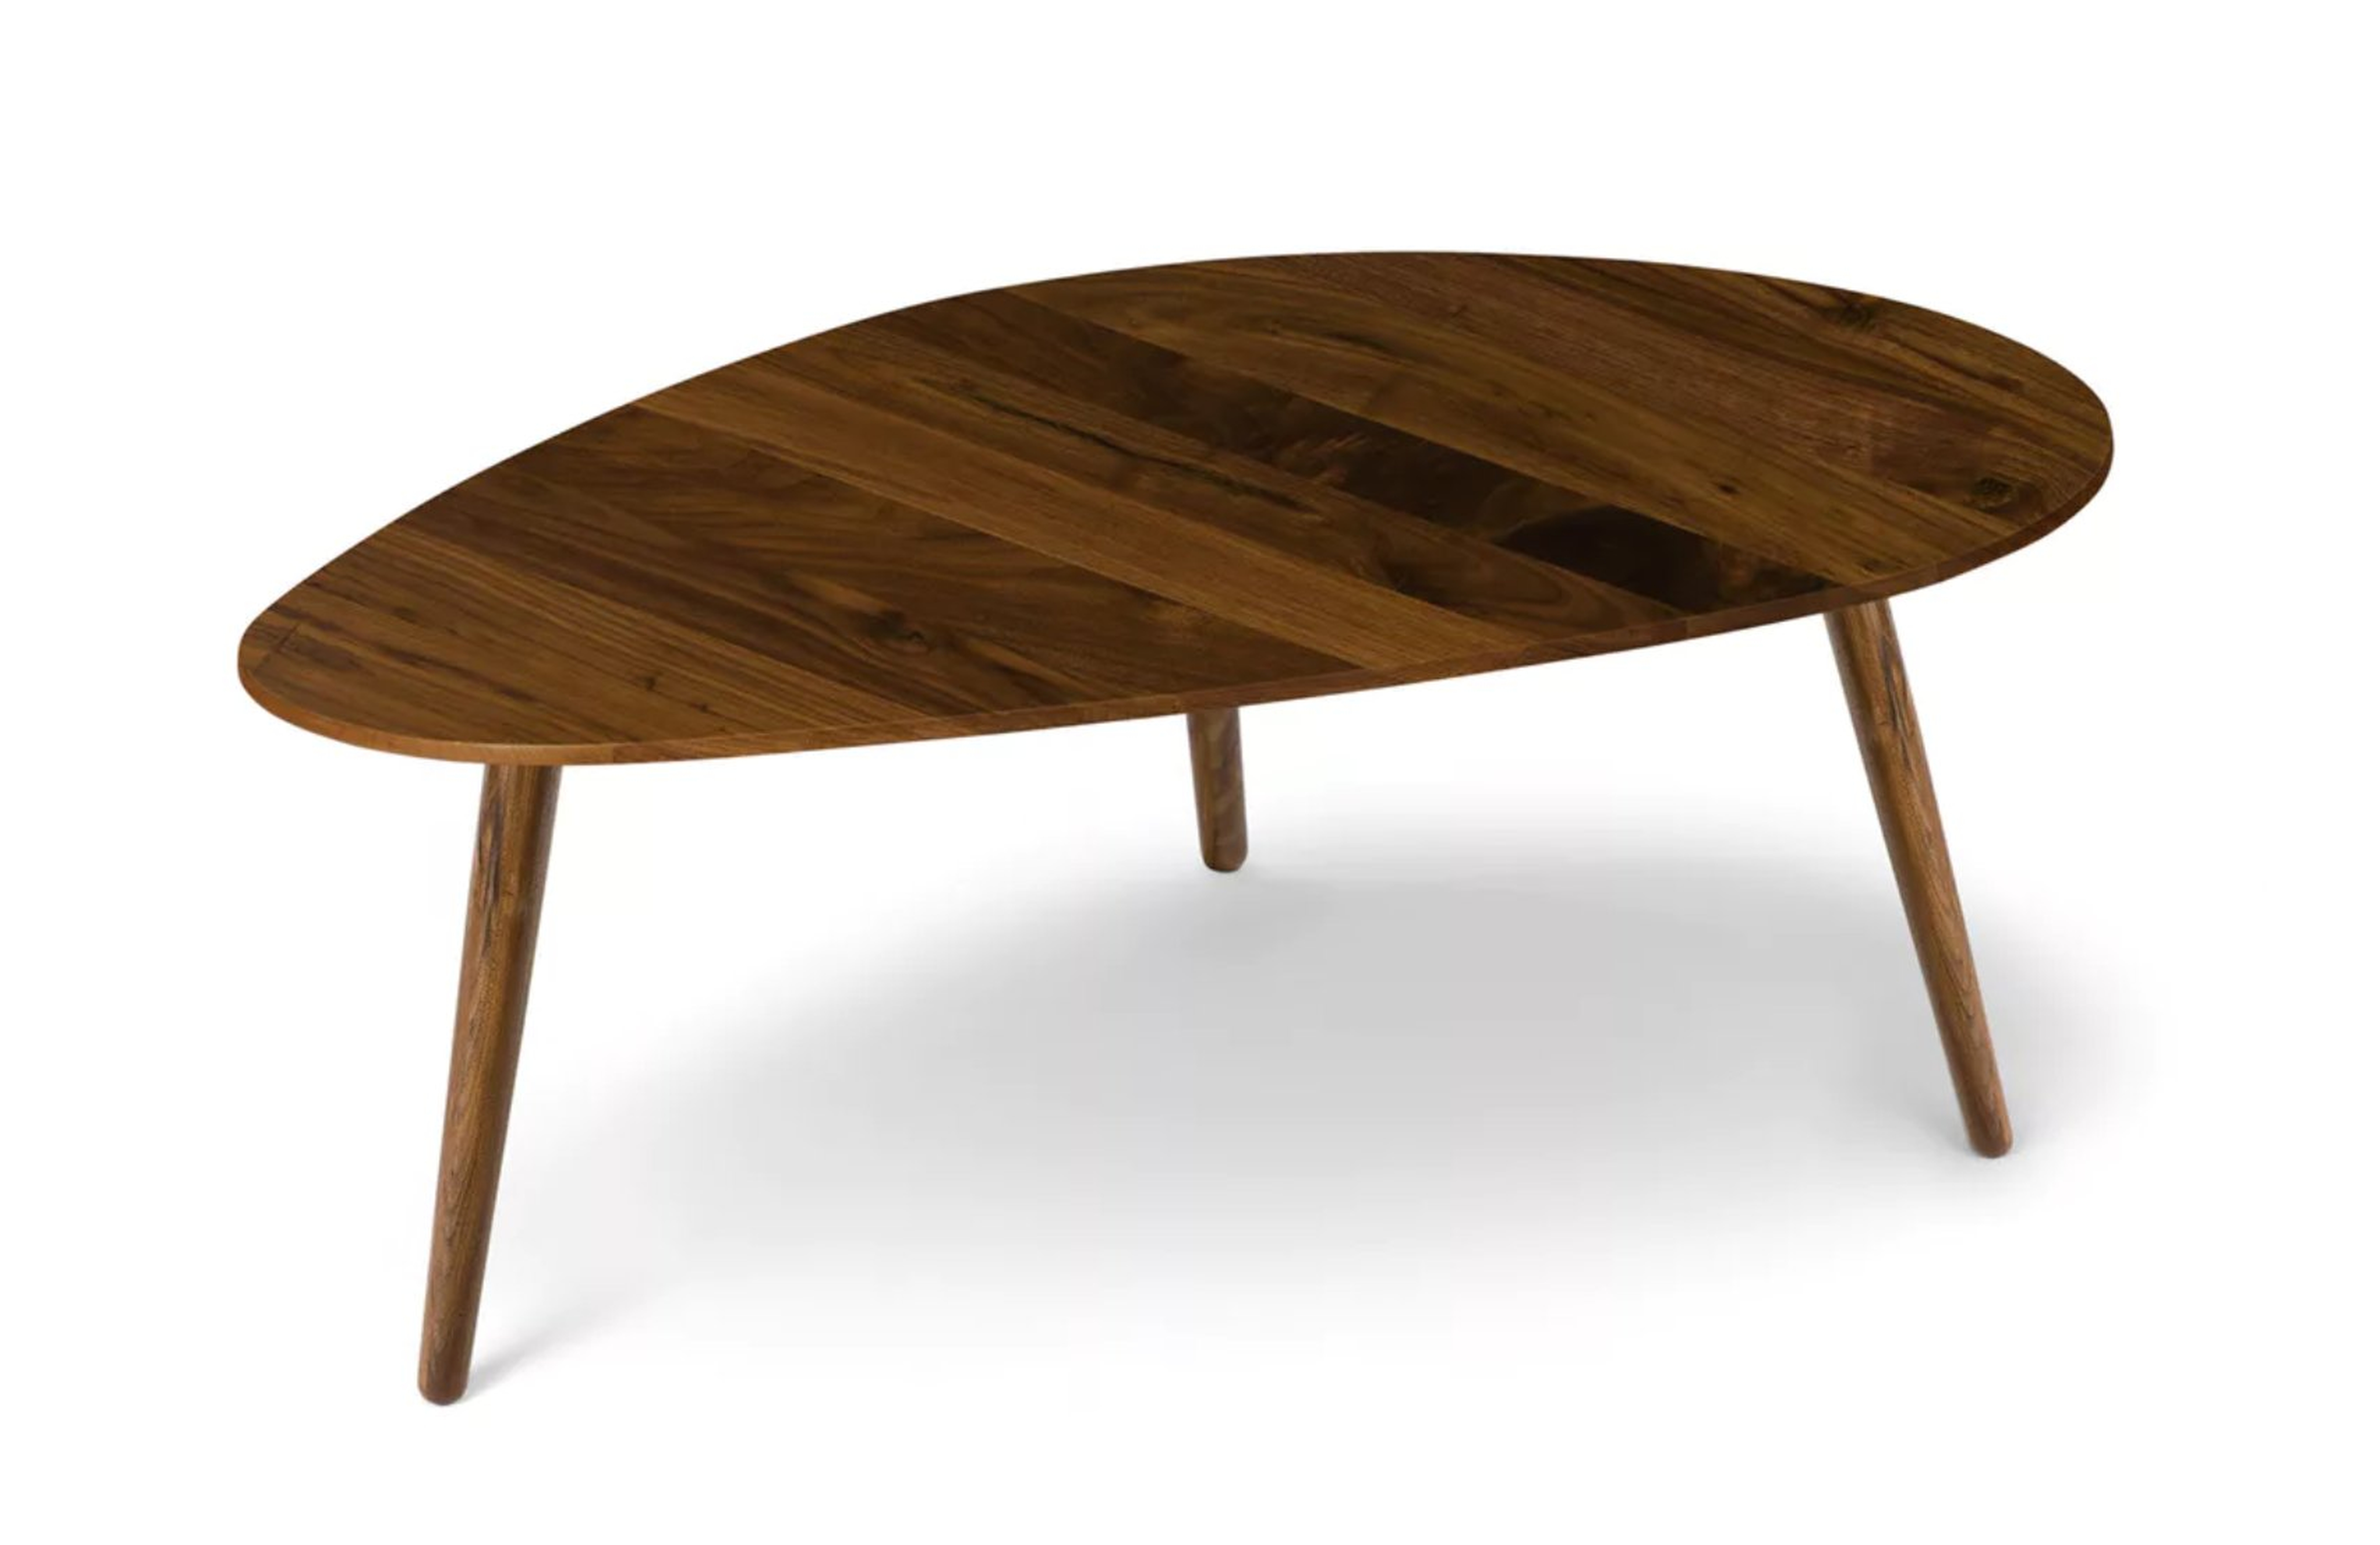 AMOEBA Mid century modern coffee table / solid wood center table - Article